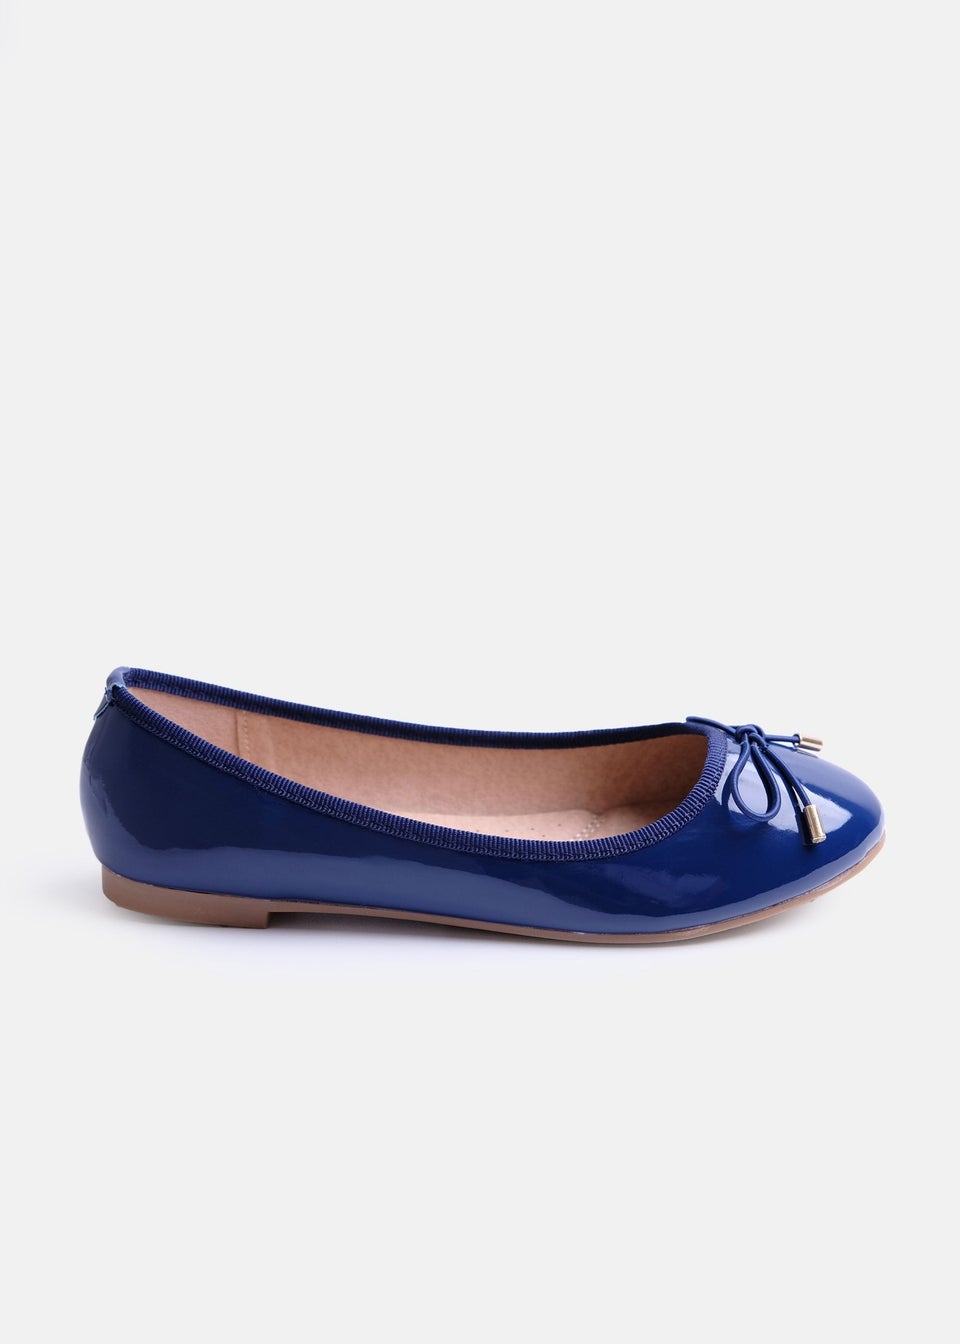 Where's That From Navy Tallulah Wide Fit Patent Flat Pumps